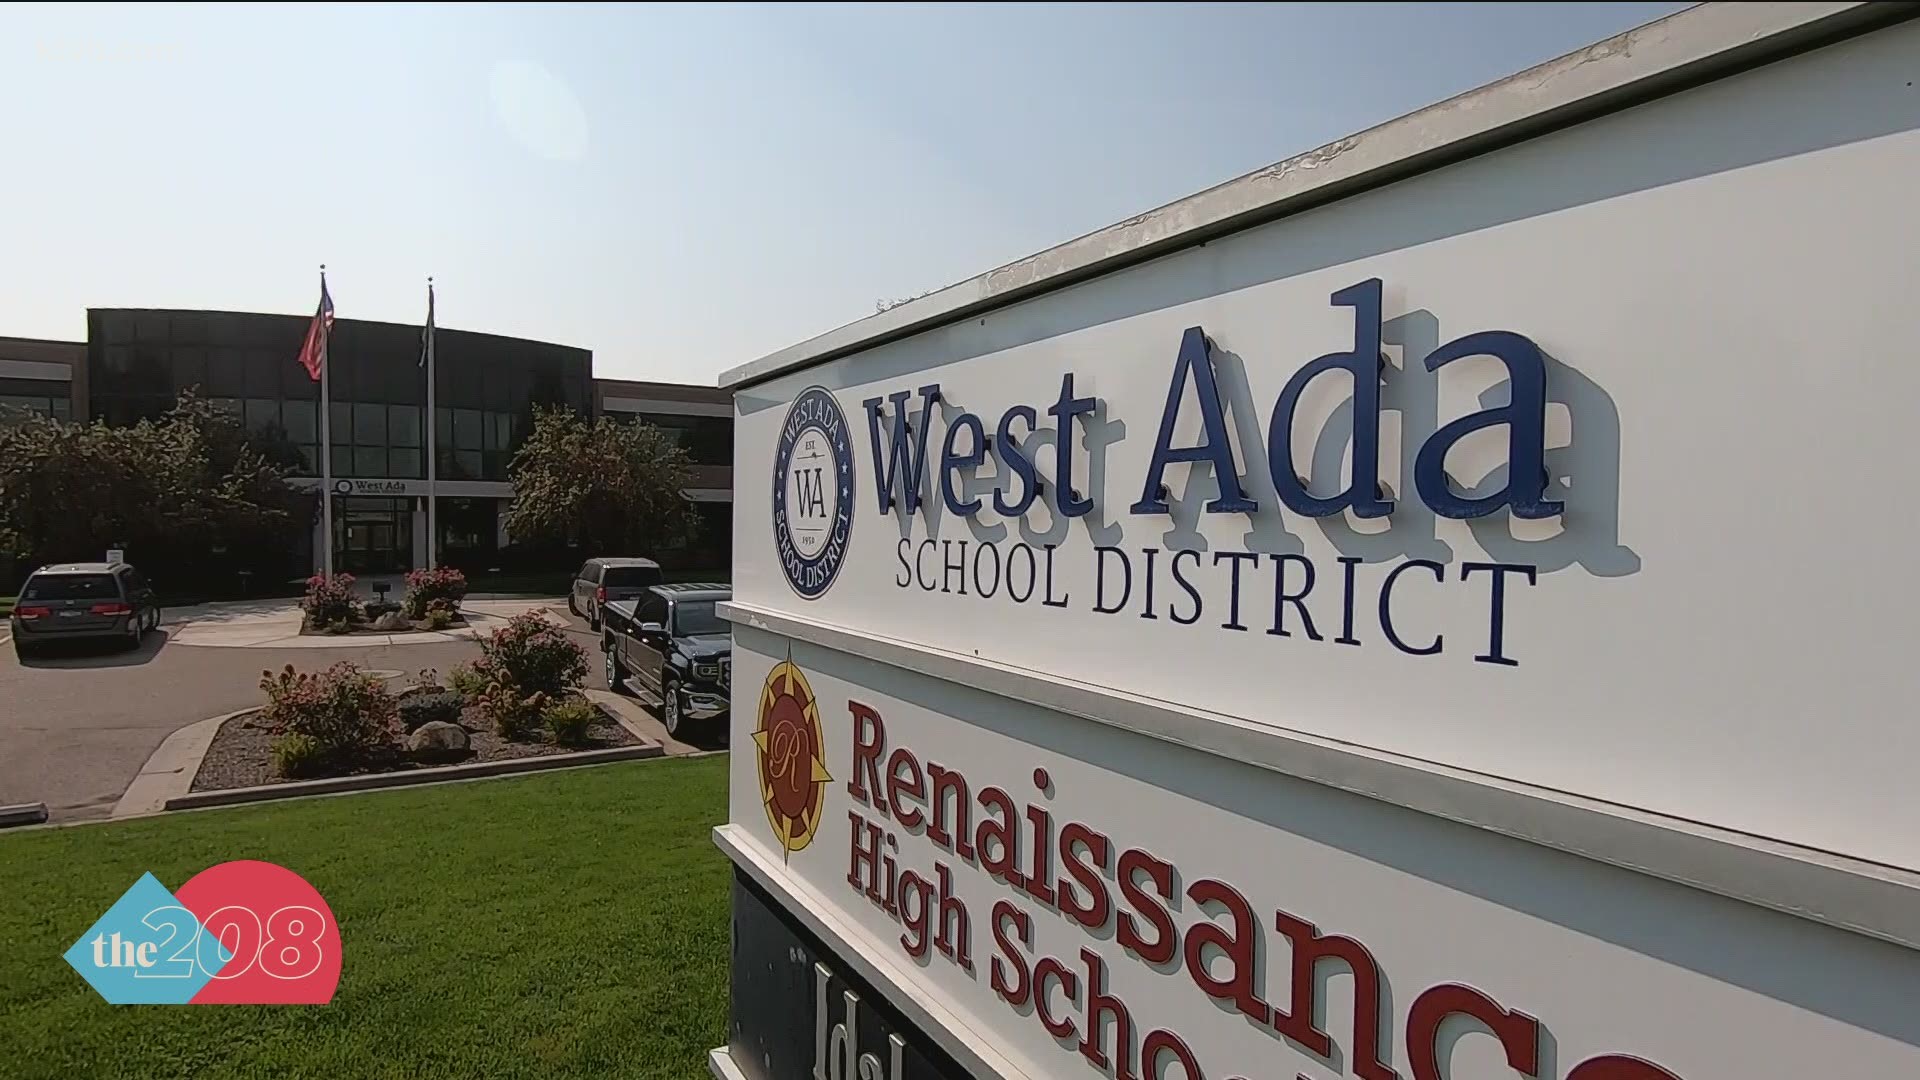 A recent survey from the West Ada School District shows a majority of parents are in favor of remaining open to in-person learning full time.